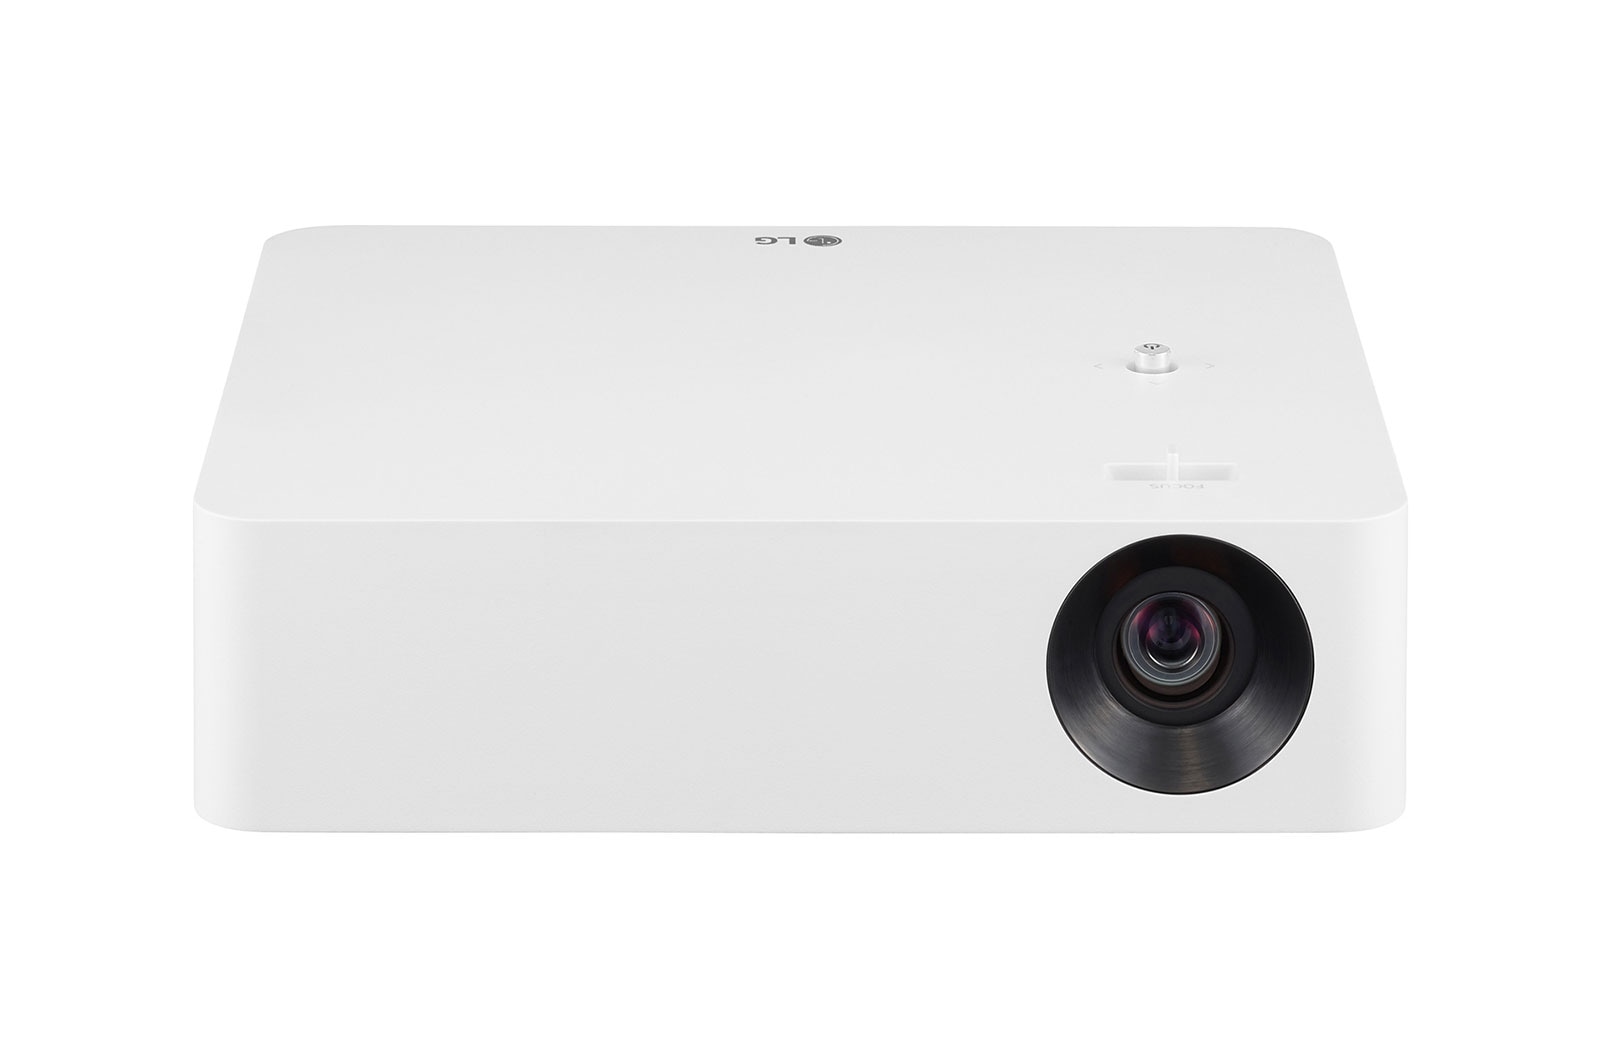 LG PF610P Full HD LED Portable Smart Home Theater CineBeam Projector -  PF610P